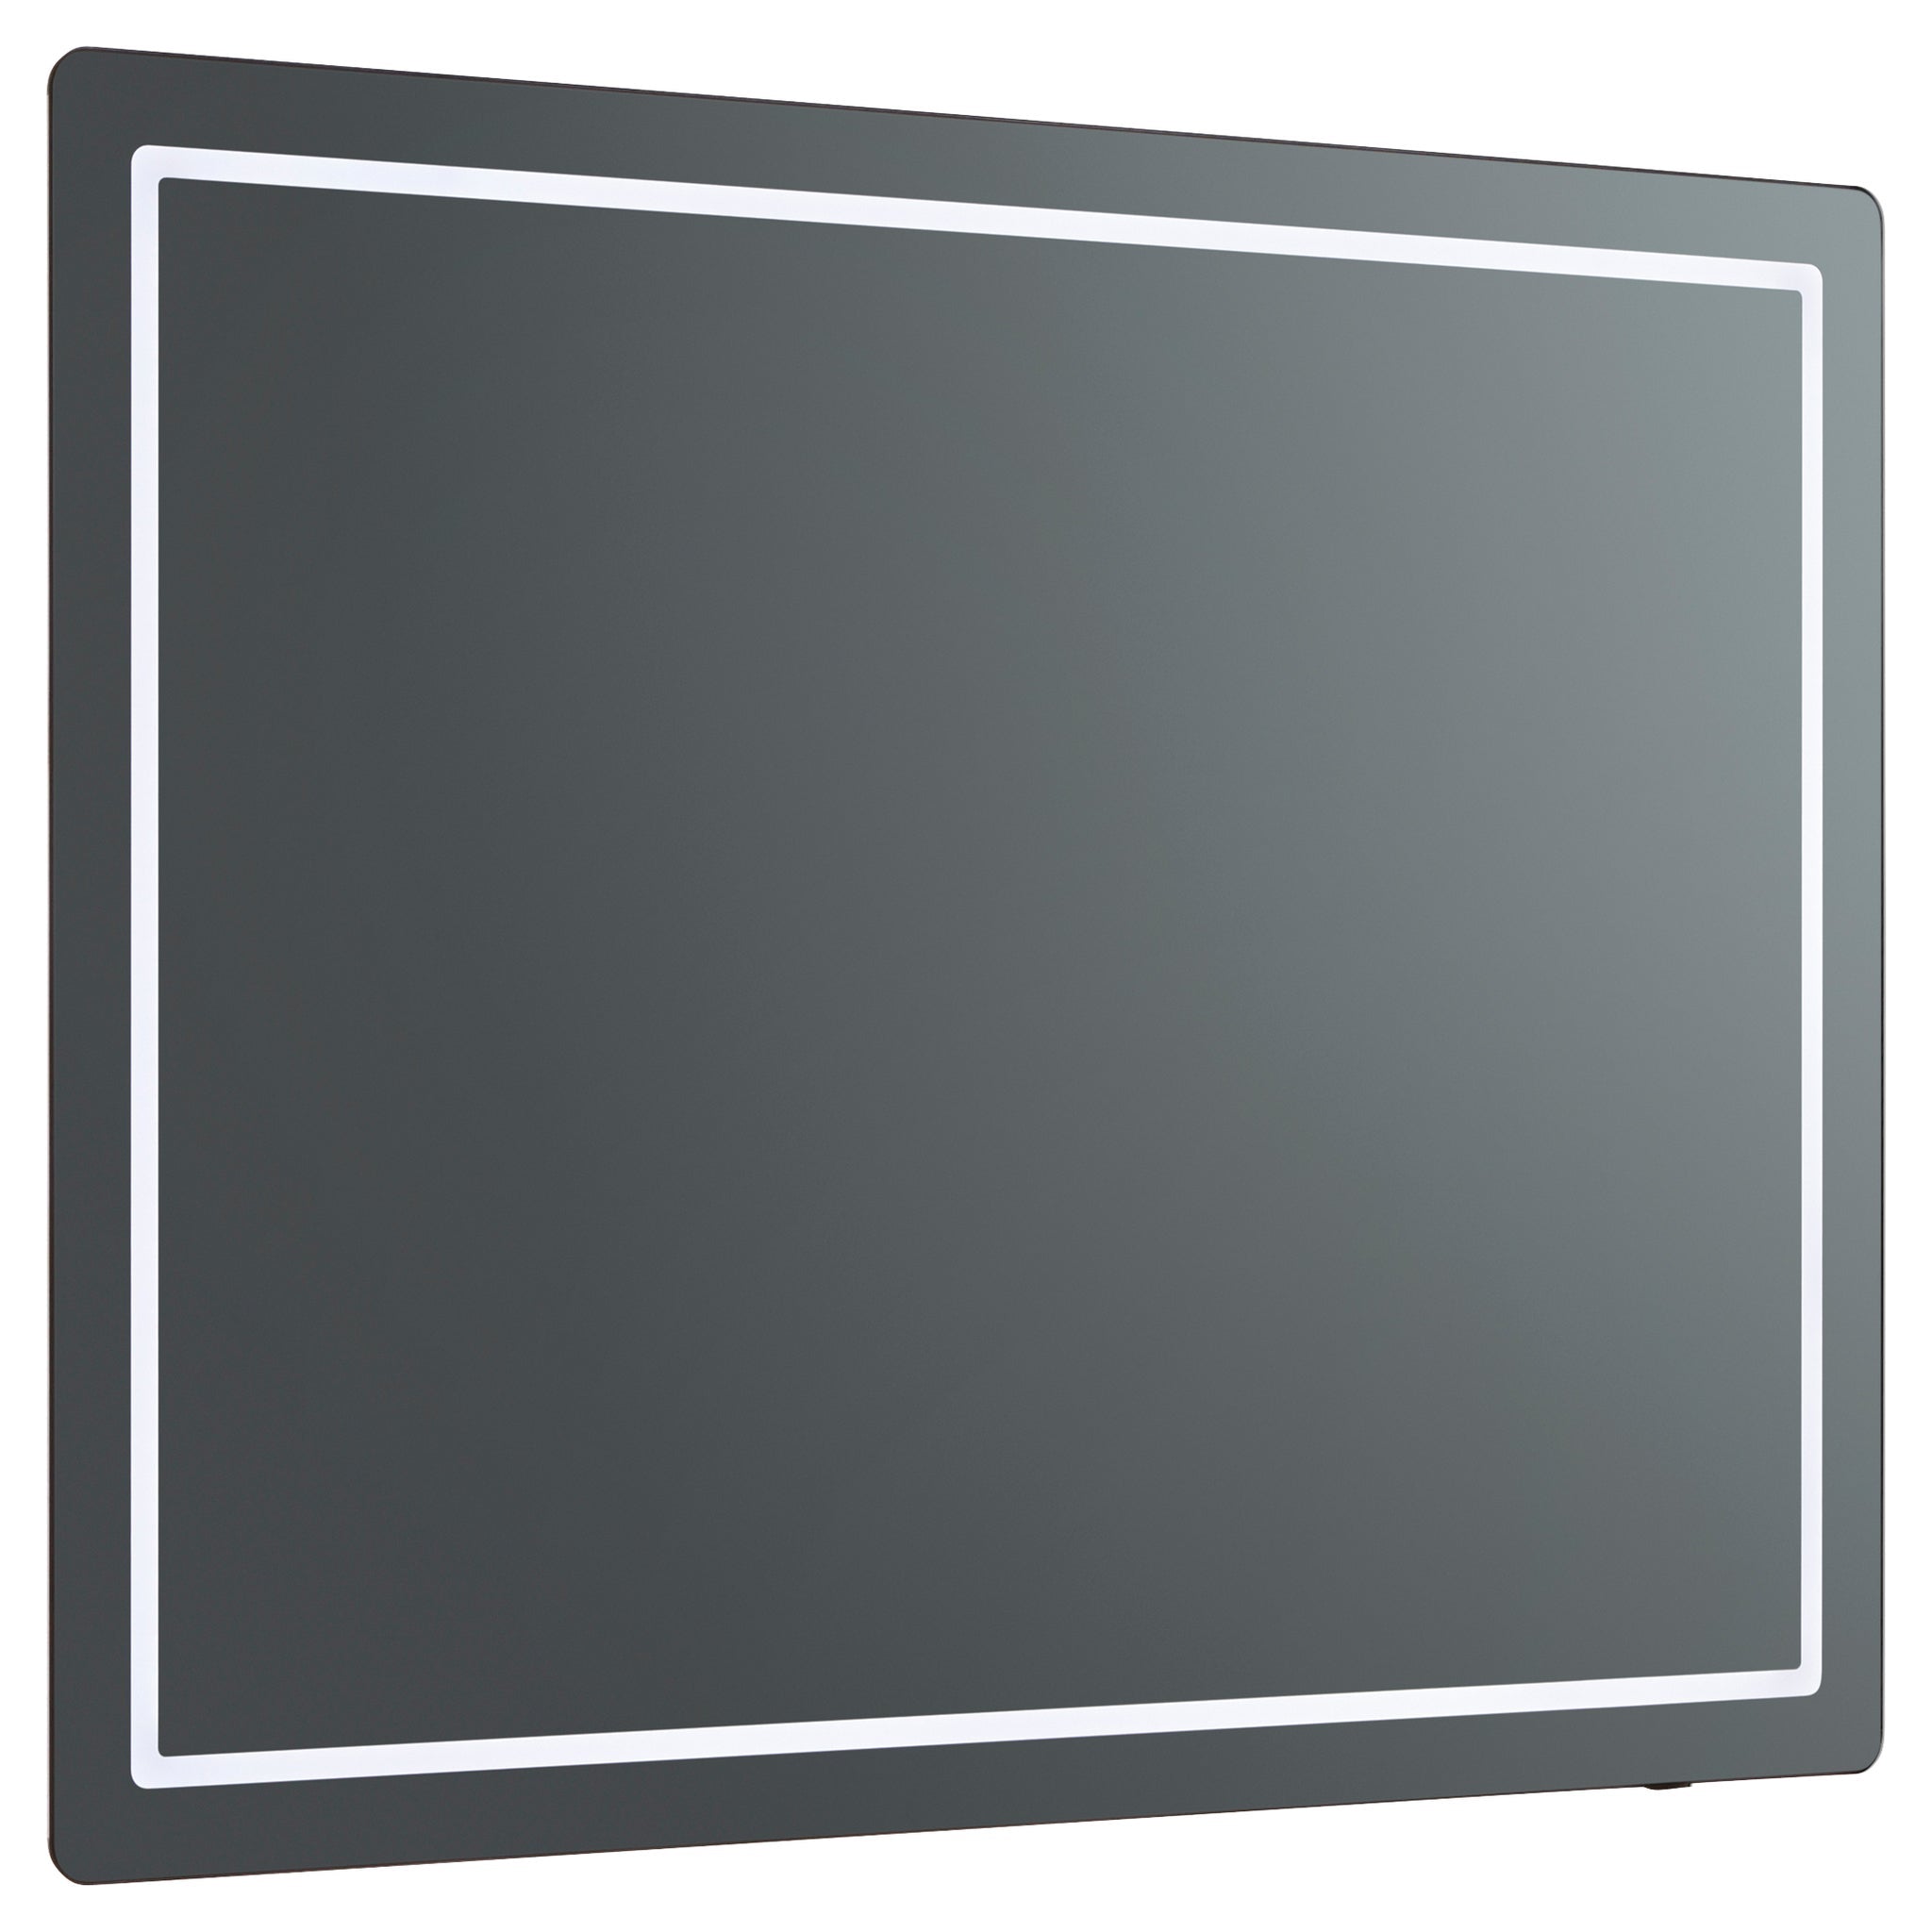 Oxygen Compact 3-0402-15 LED Lighted Mirror 36x36 Inch - Black